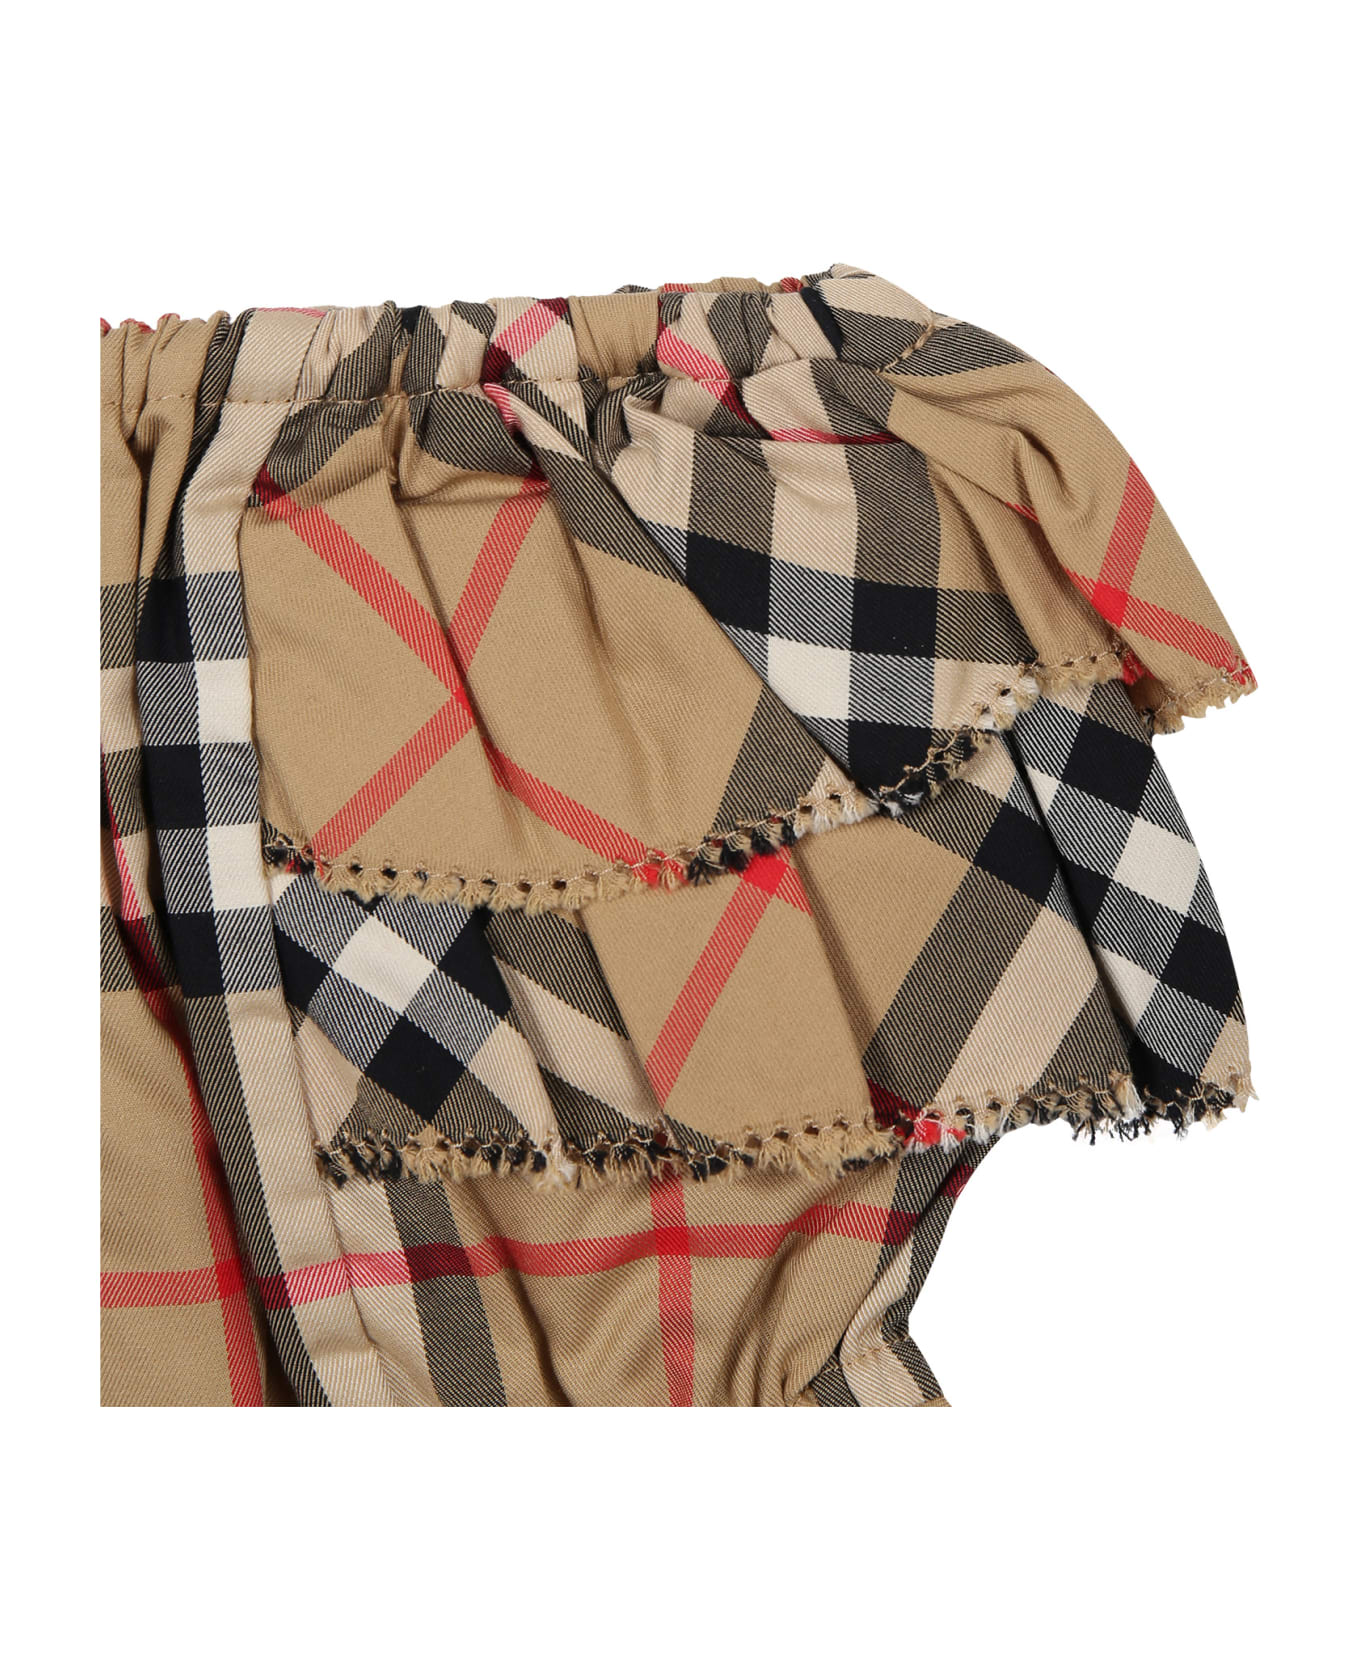 Burberry Beige Shorts For Baby Girl With Iconic All-over Vintage Check - Beige